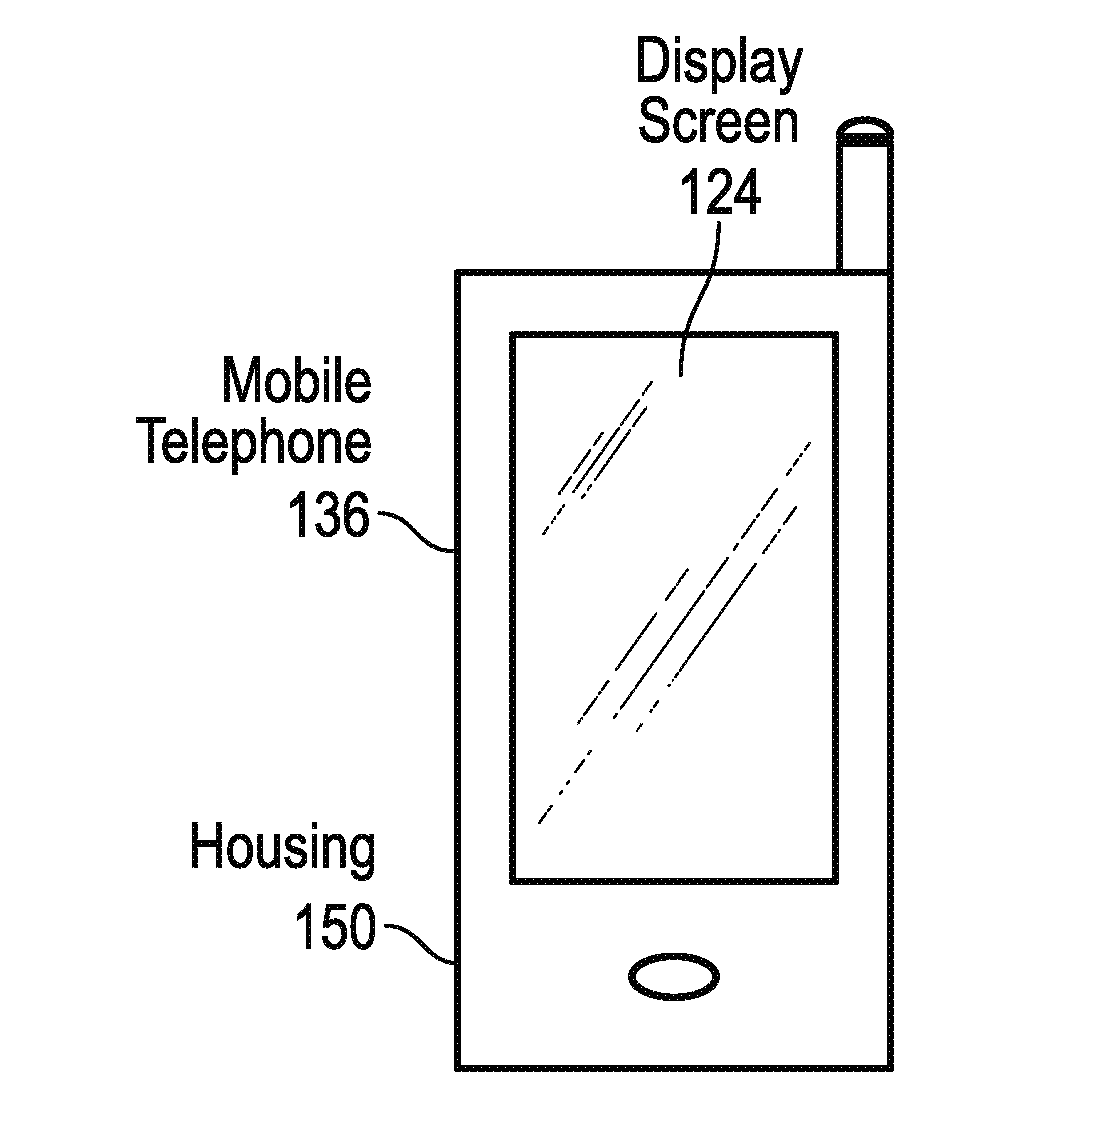 Multi-layer thin-film coatings for system-in-package assemblies in portable electronic devices